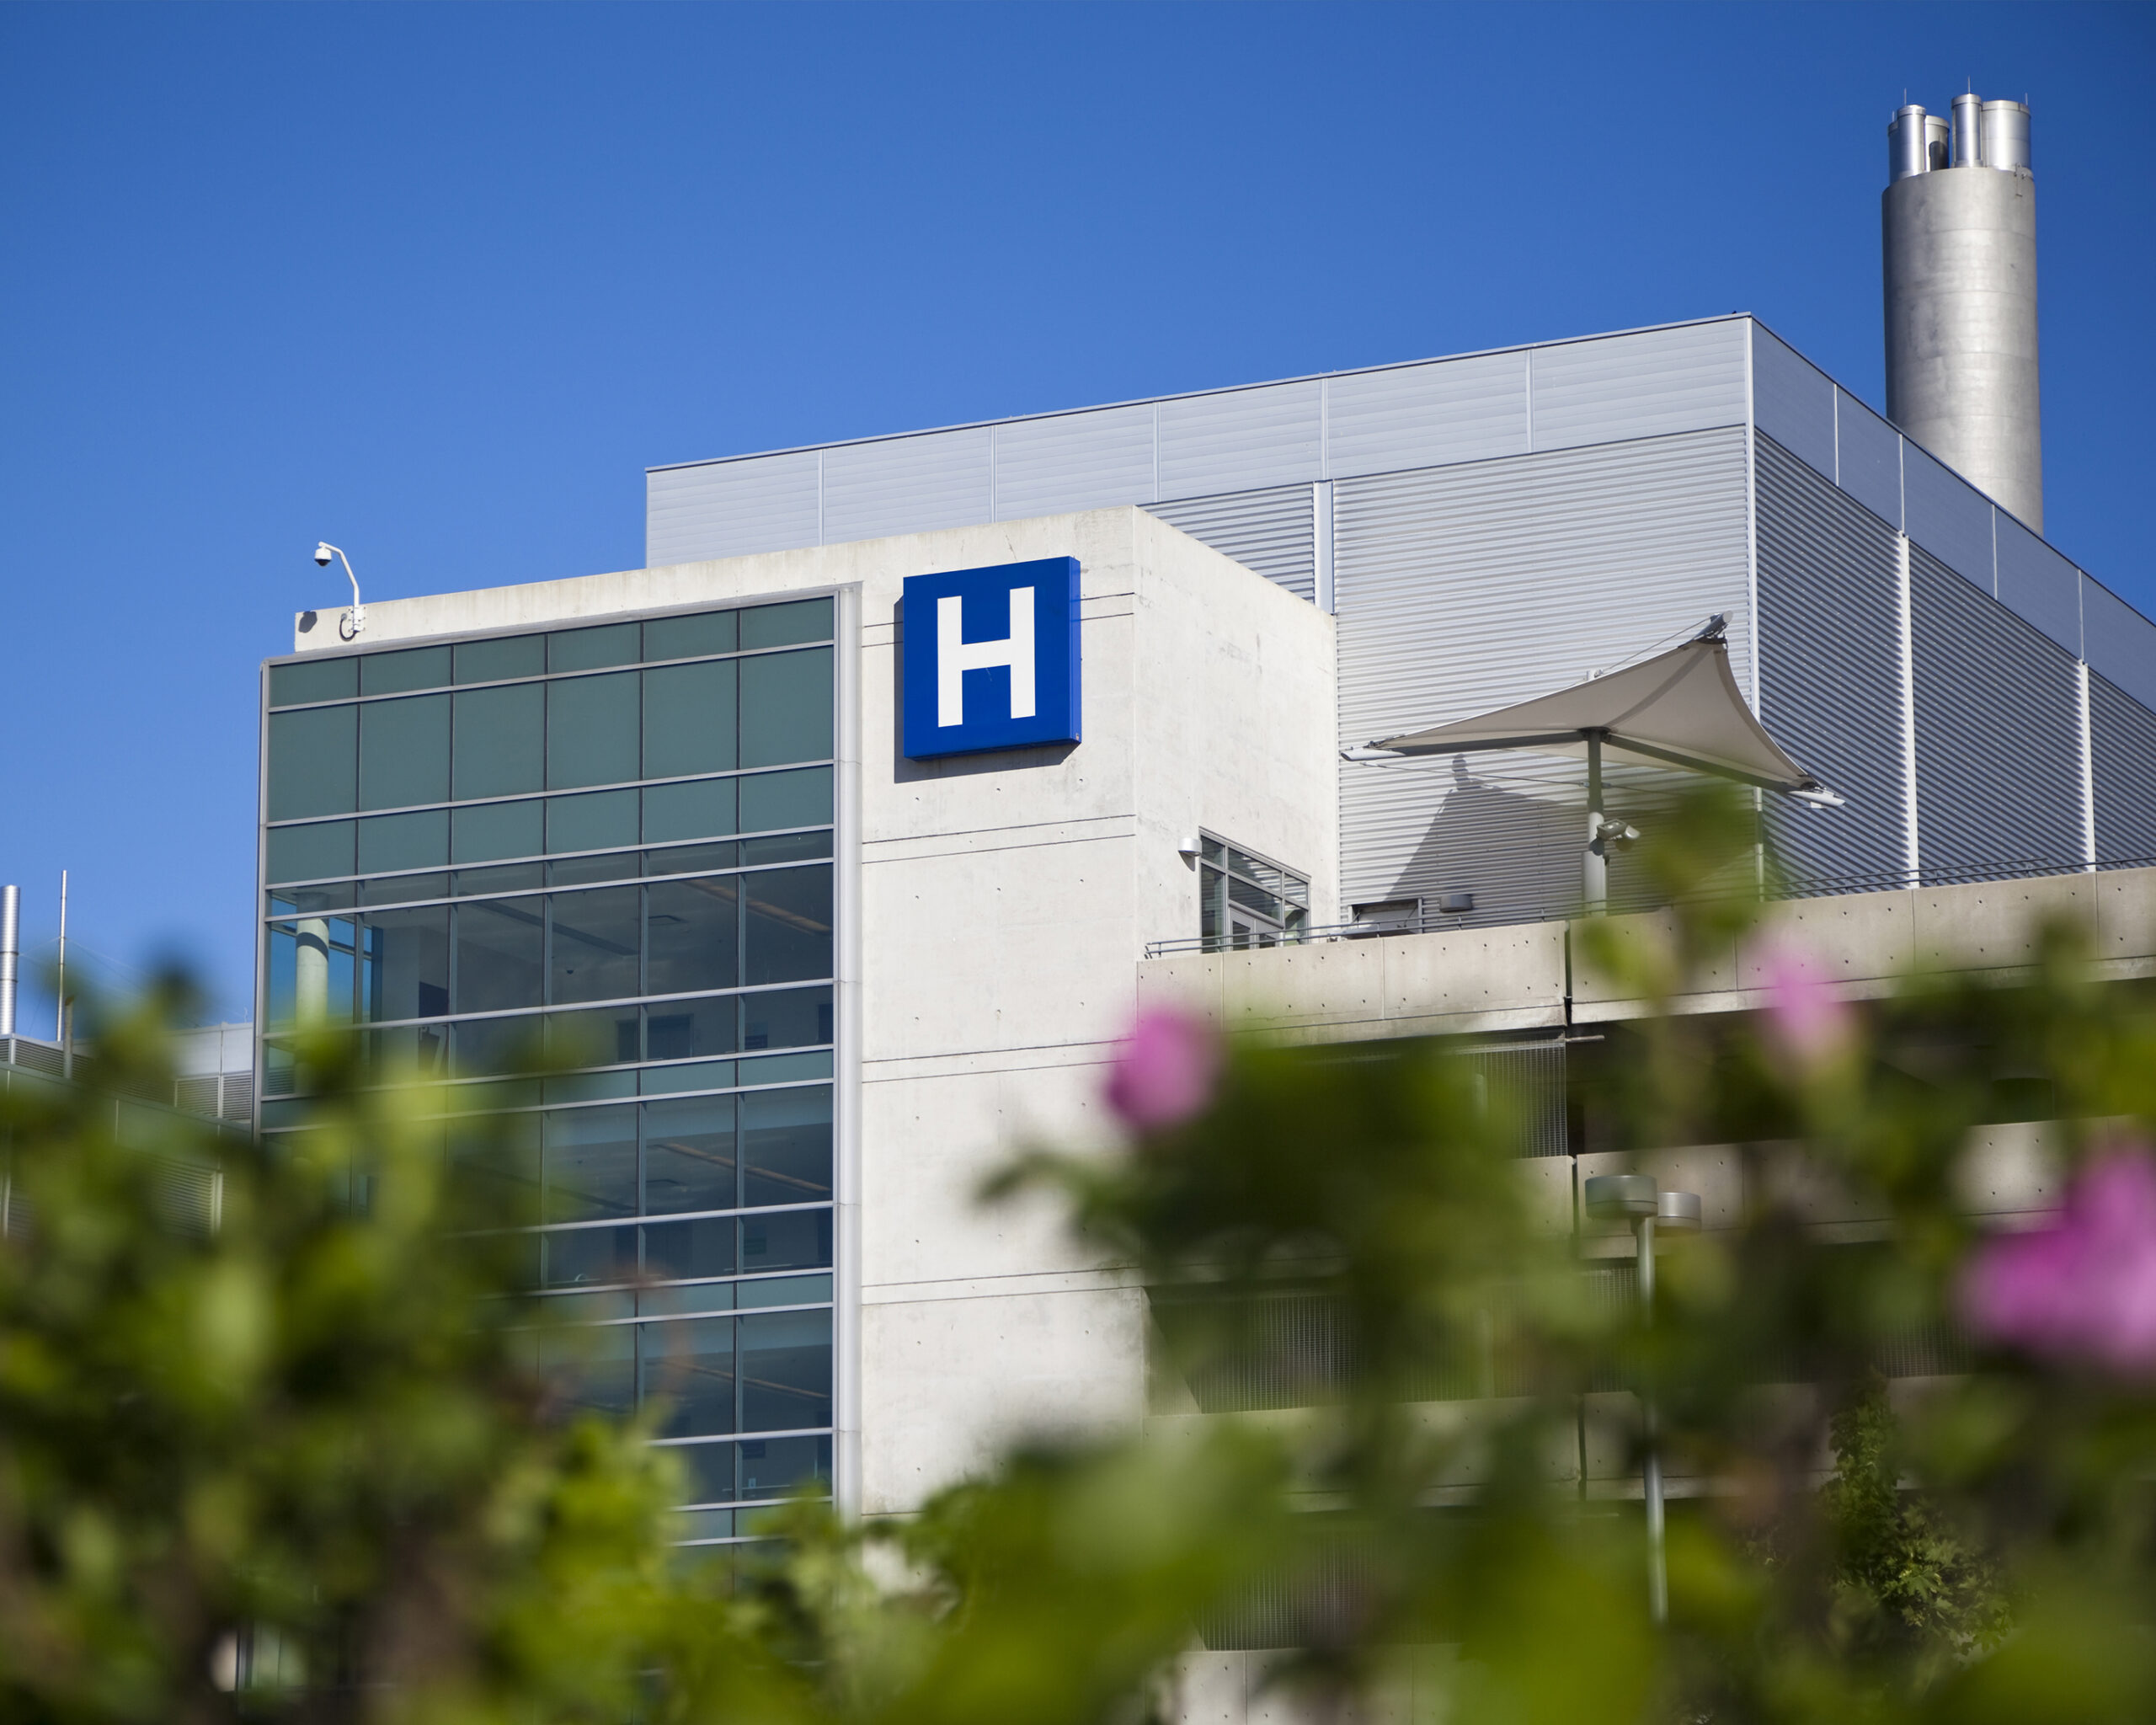 An exterior photo of a hospital. The building features walls of concrete and glass and a prominently placed H symbol.